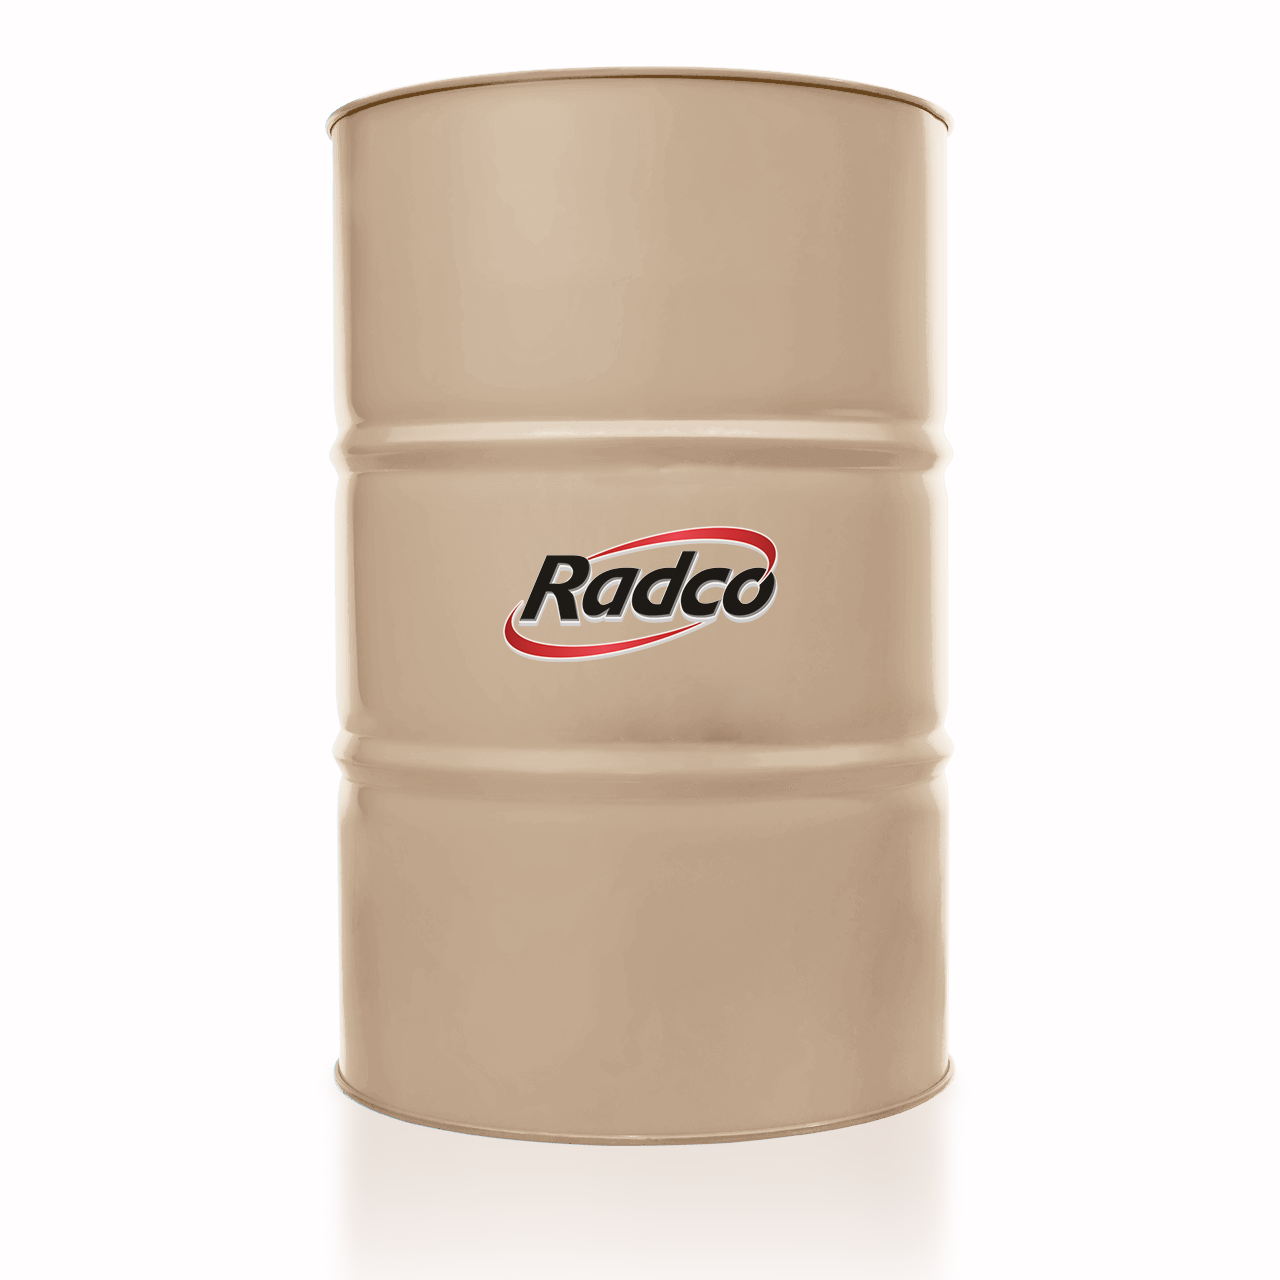 Buy ﻿RADCOLUBE FR282 Premium ISO VG 15 Synthetic Hydrocarbon Fire